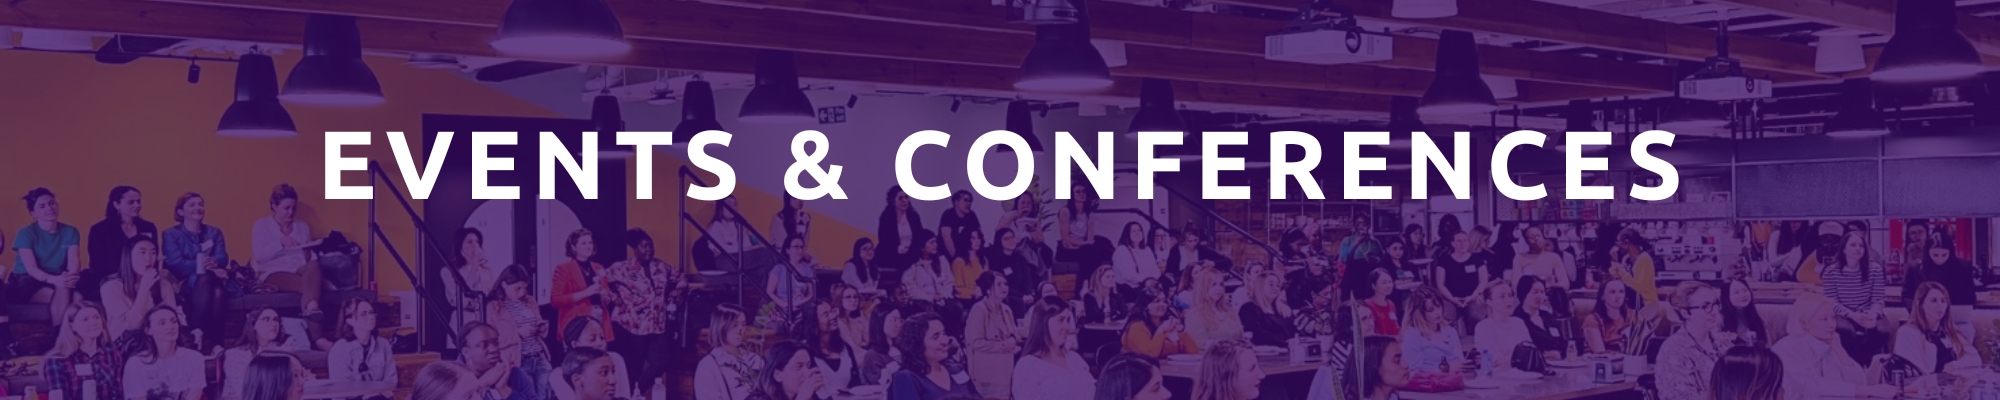 Women in Tech Events and Conferences